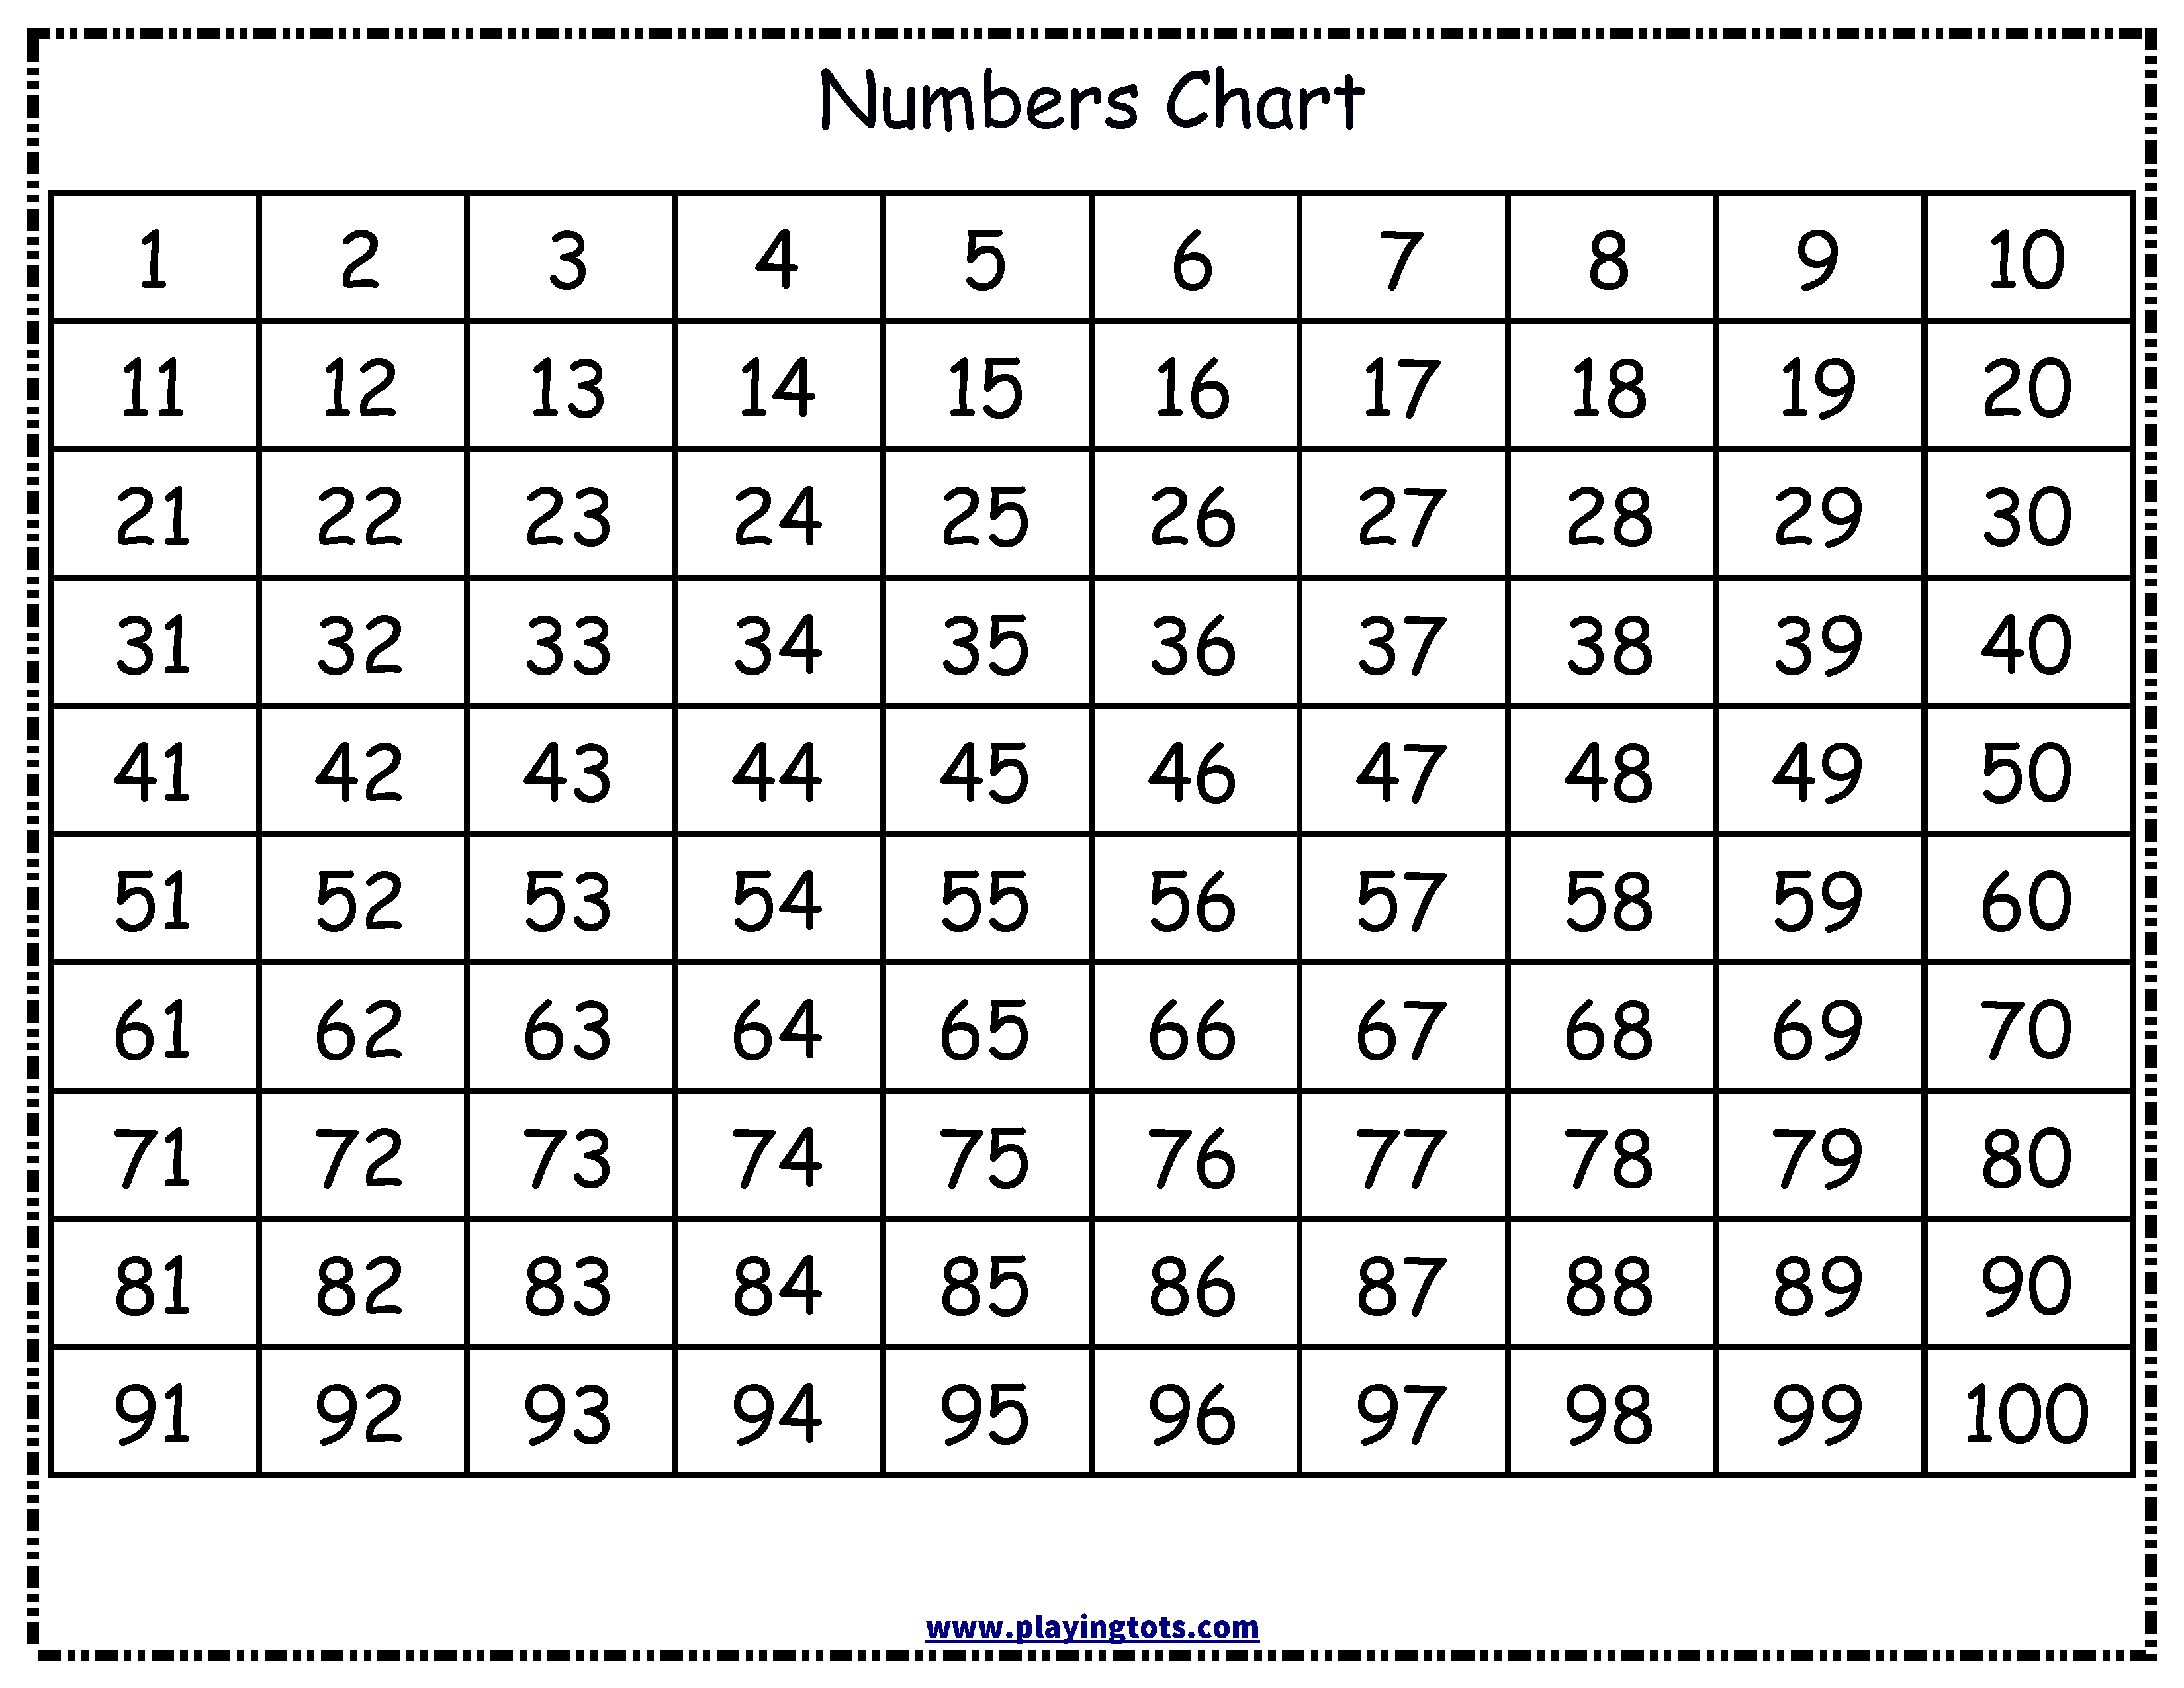 Free Printable Numbers Chart (1 -100) | Free Printable For Learning - Free Printable Number Worksheets 1 100